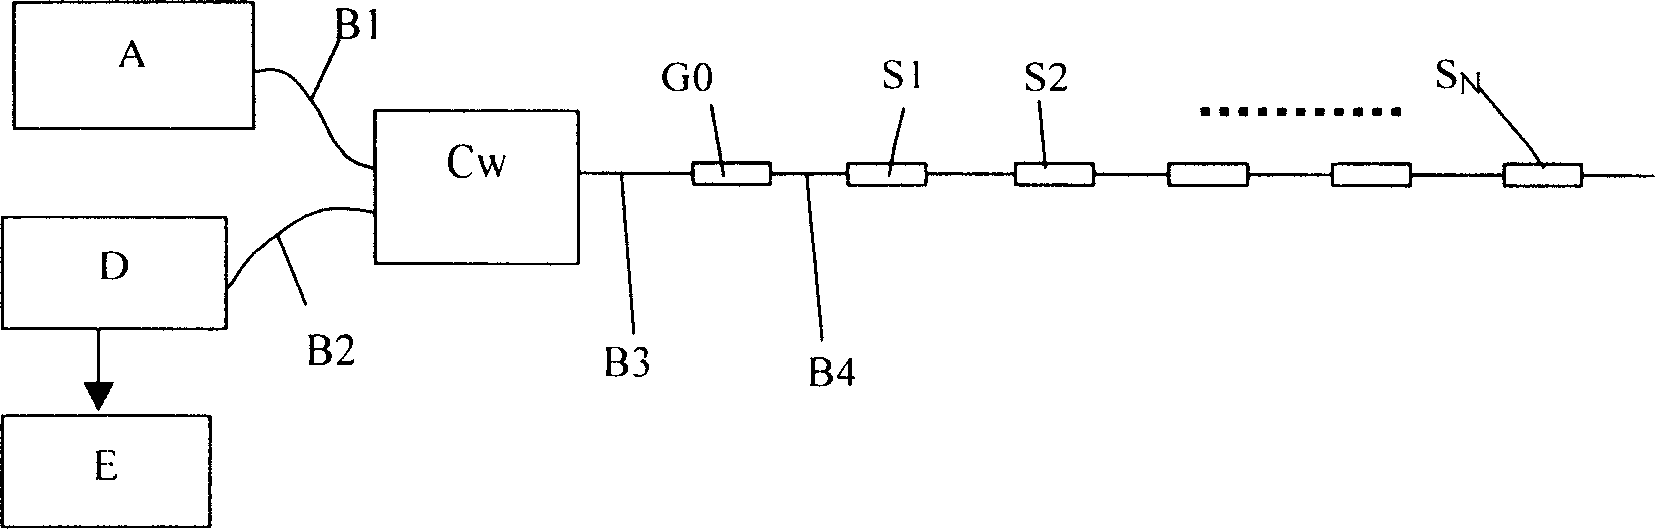 Distributed microstructure optical fiber gas sensing system and sensing method